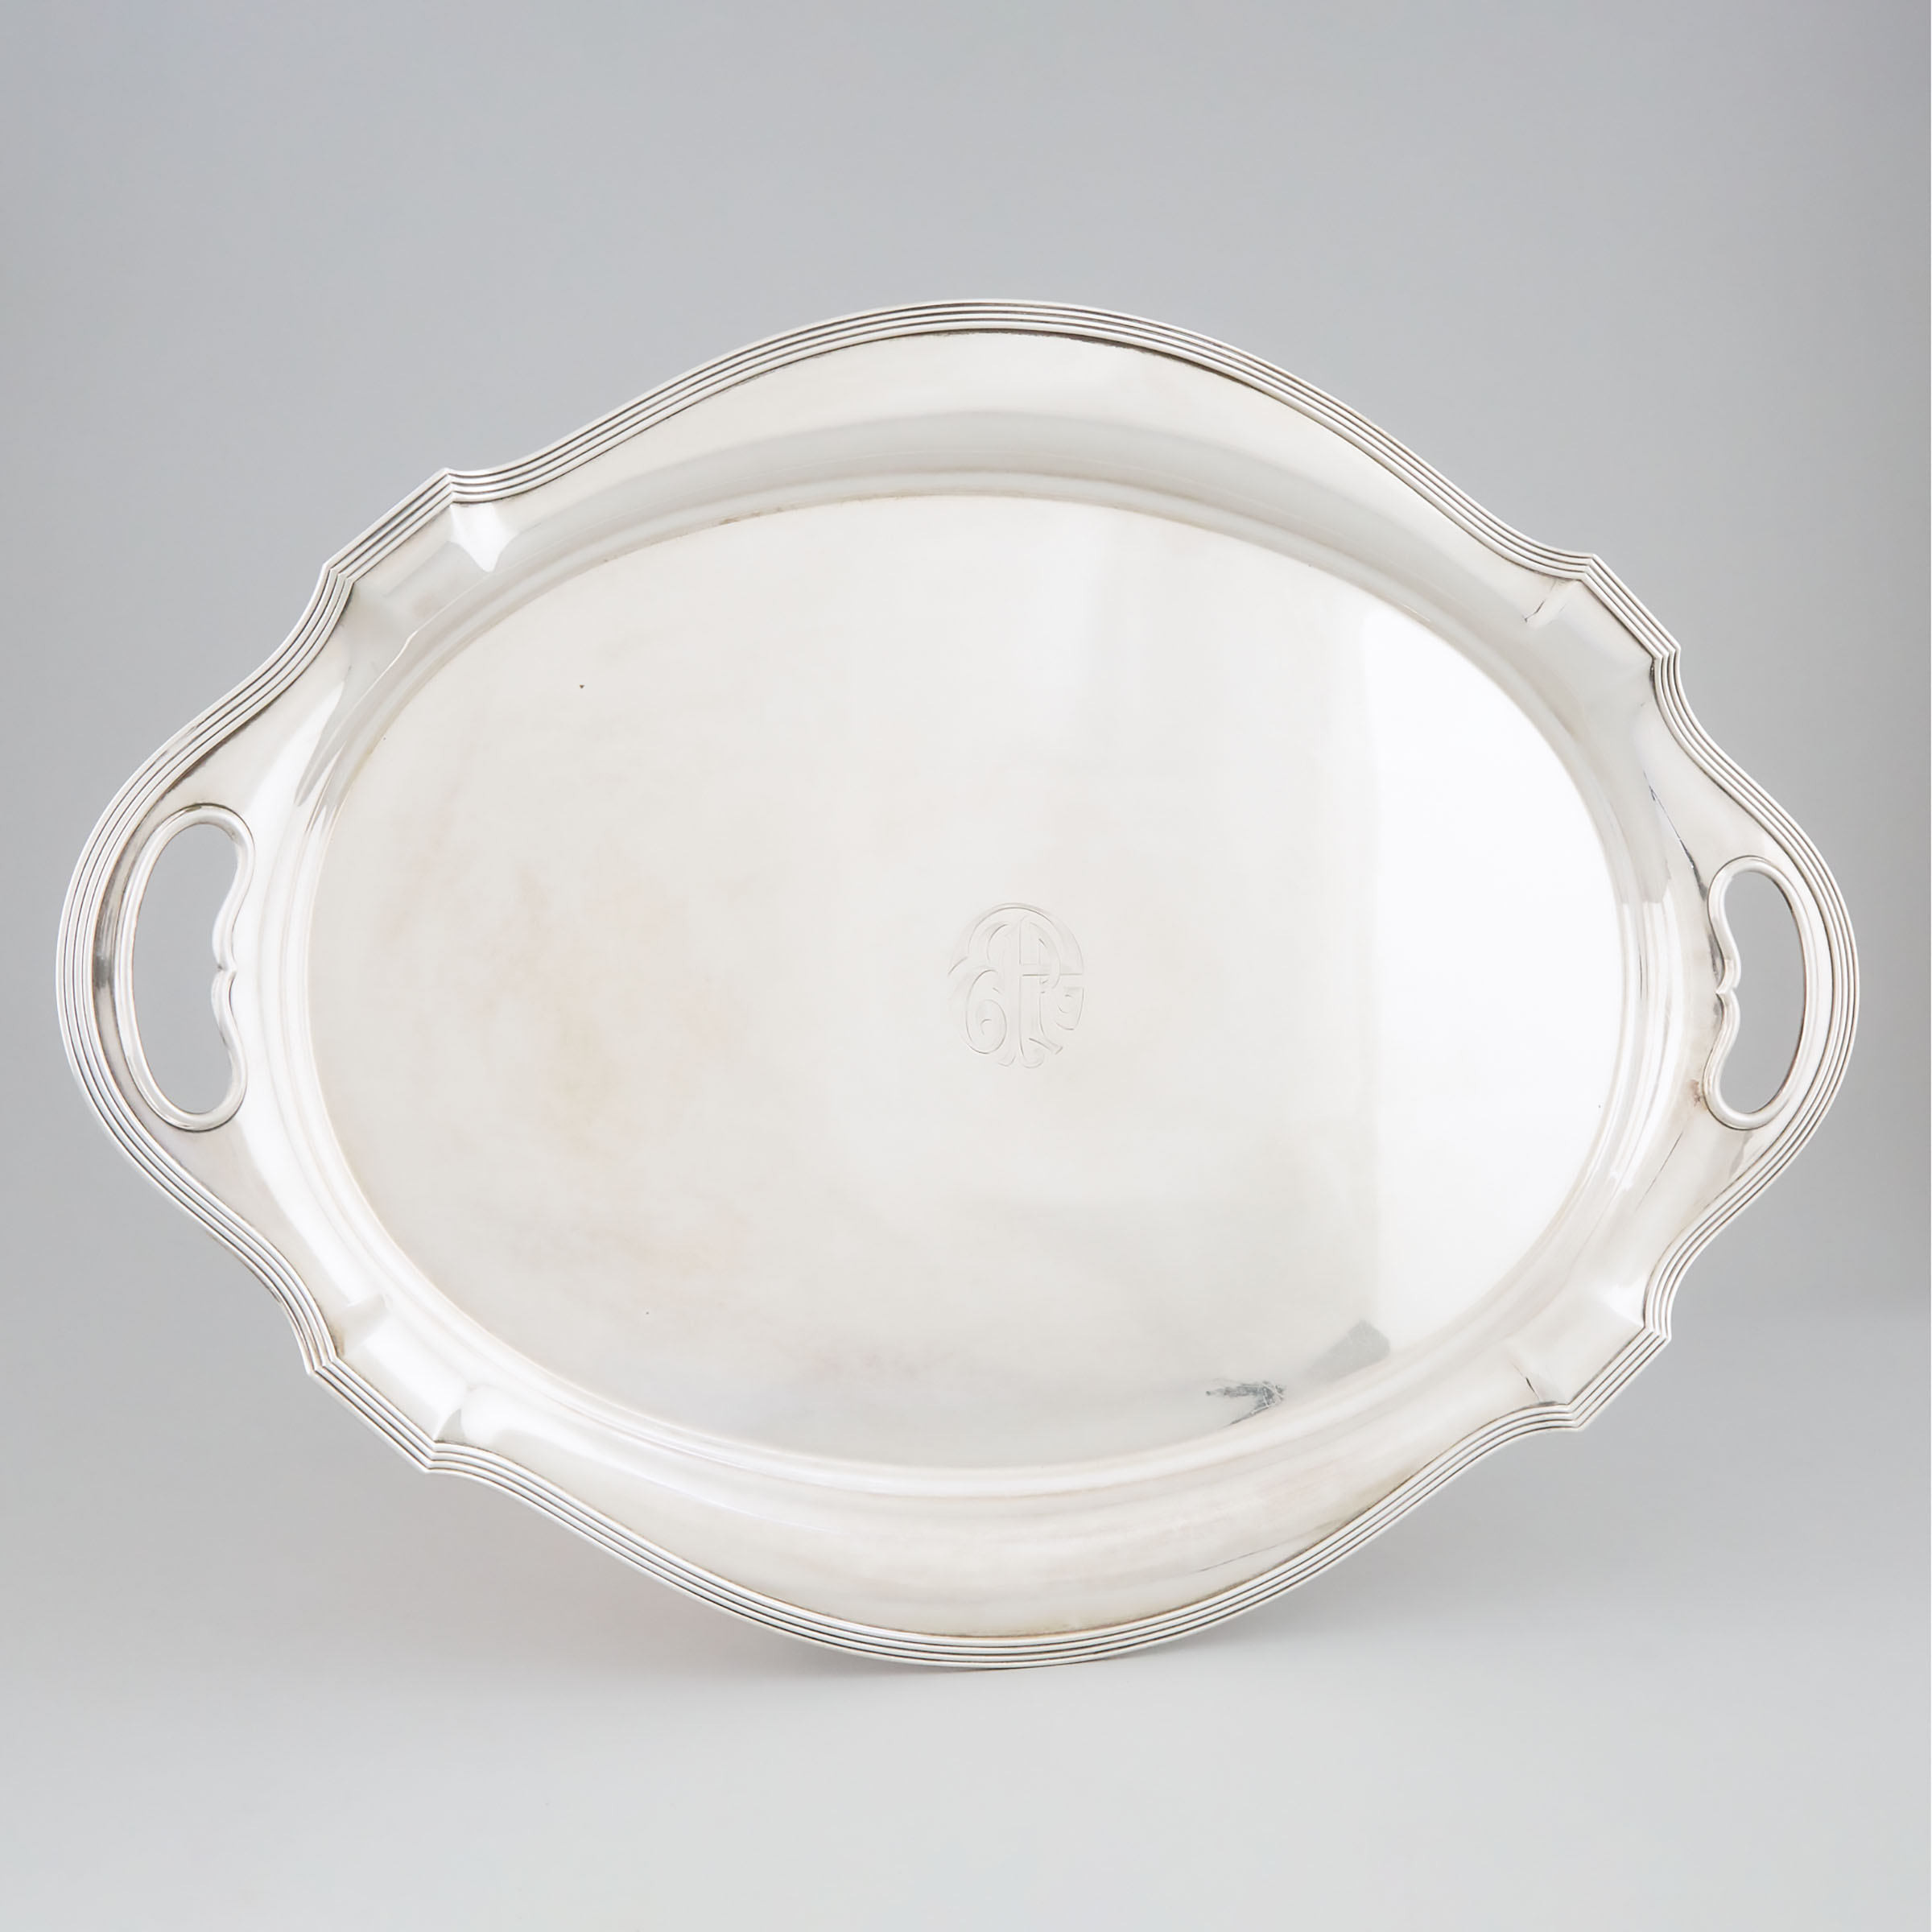 American Silver Two-Handled Oval Serving Tray, Gorham Mfg. Co., Providence, R.I., 1922